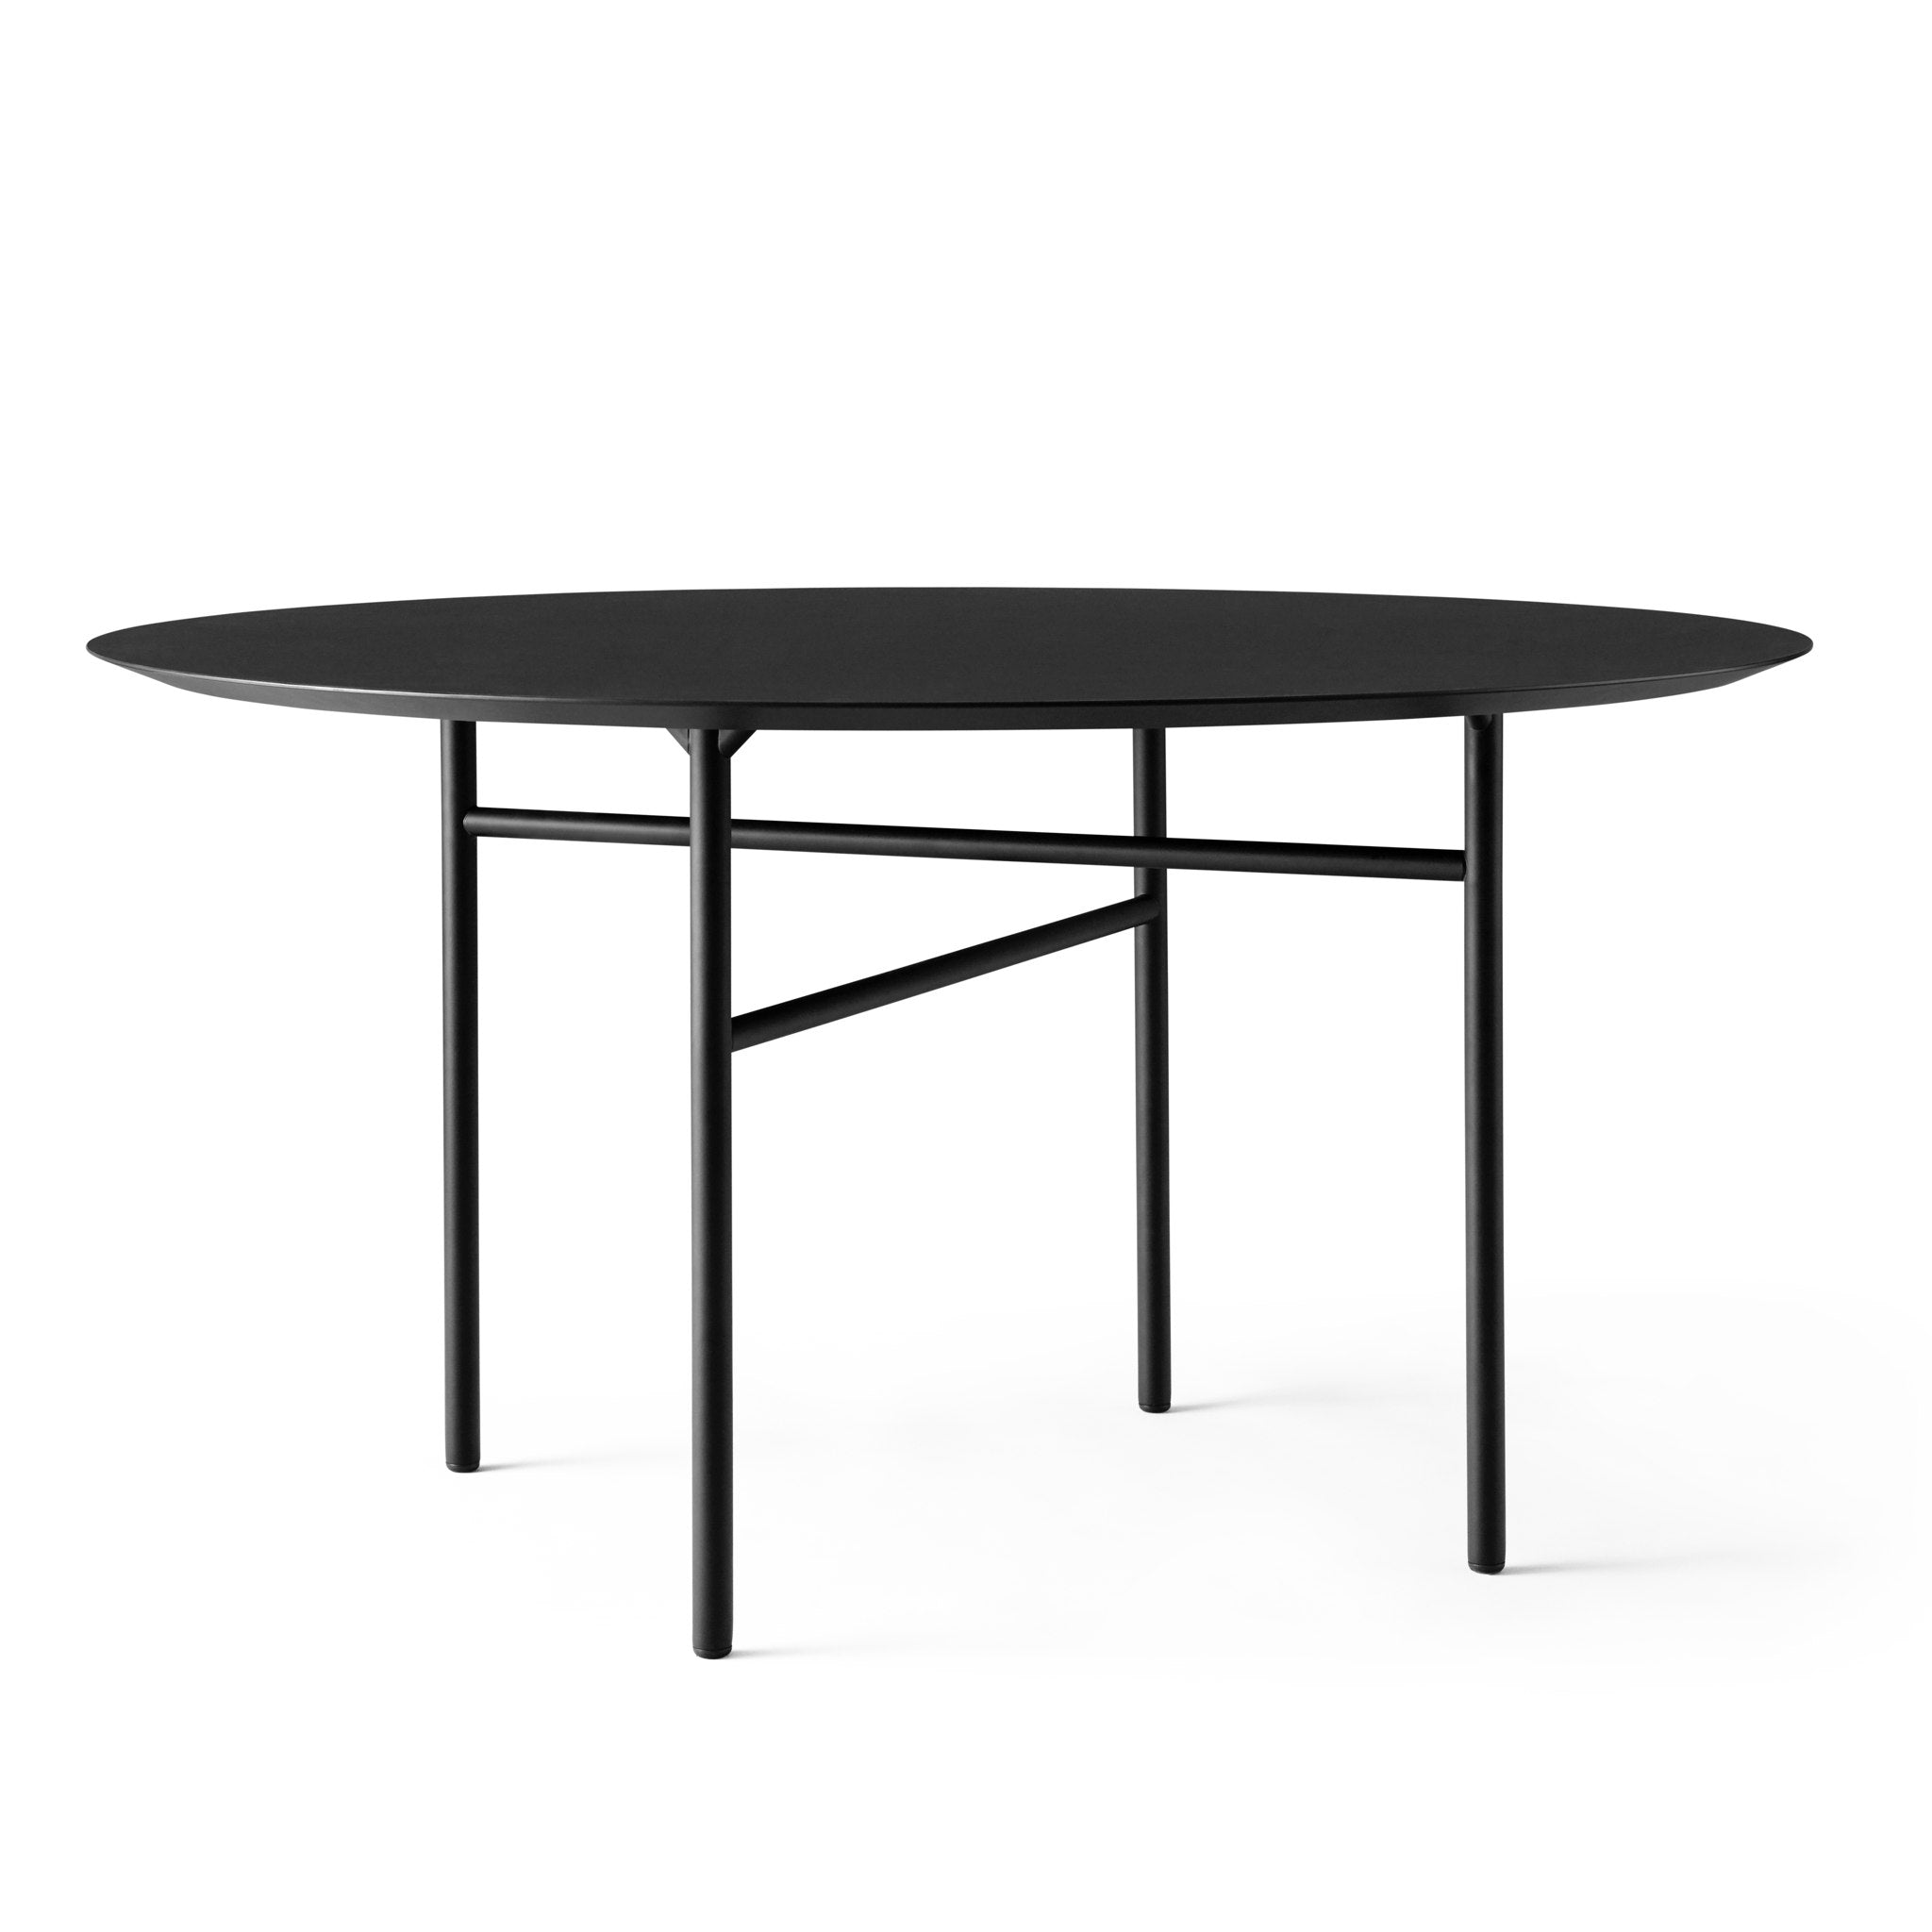 Snaregade Dining Table Round by Norm Architects